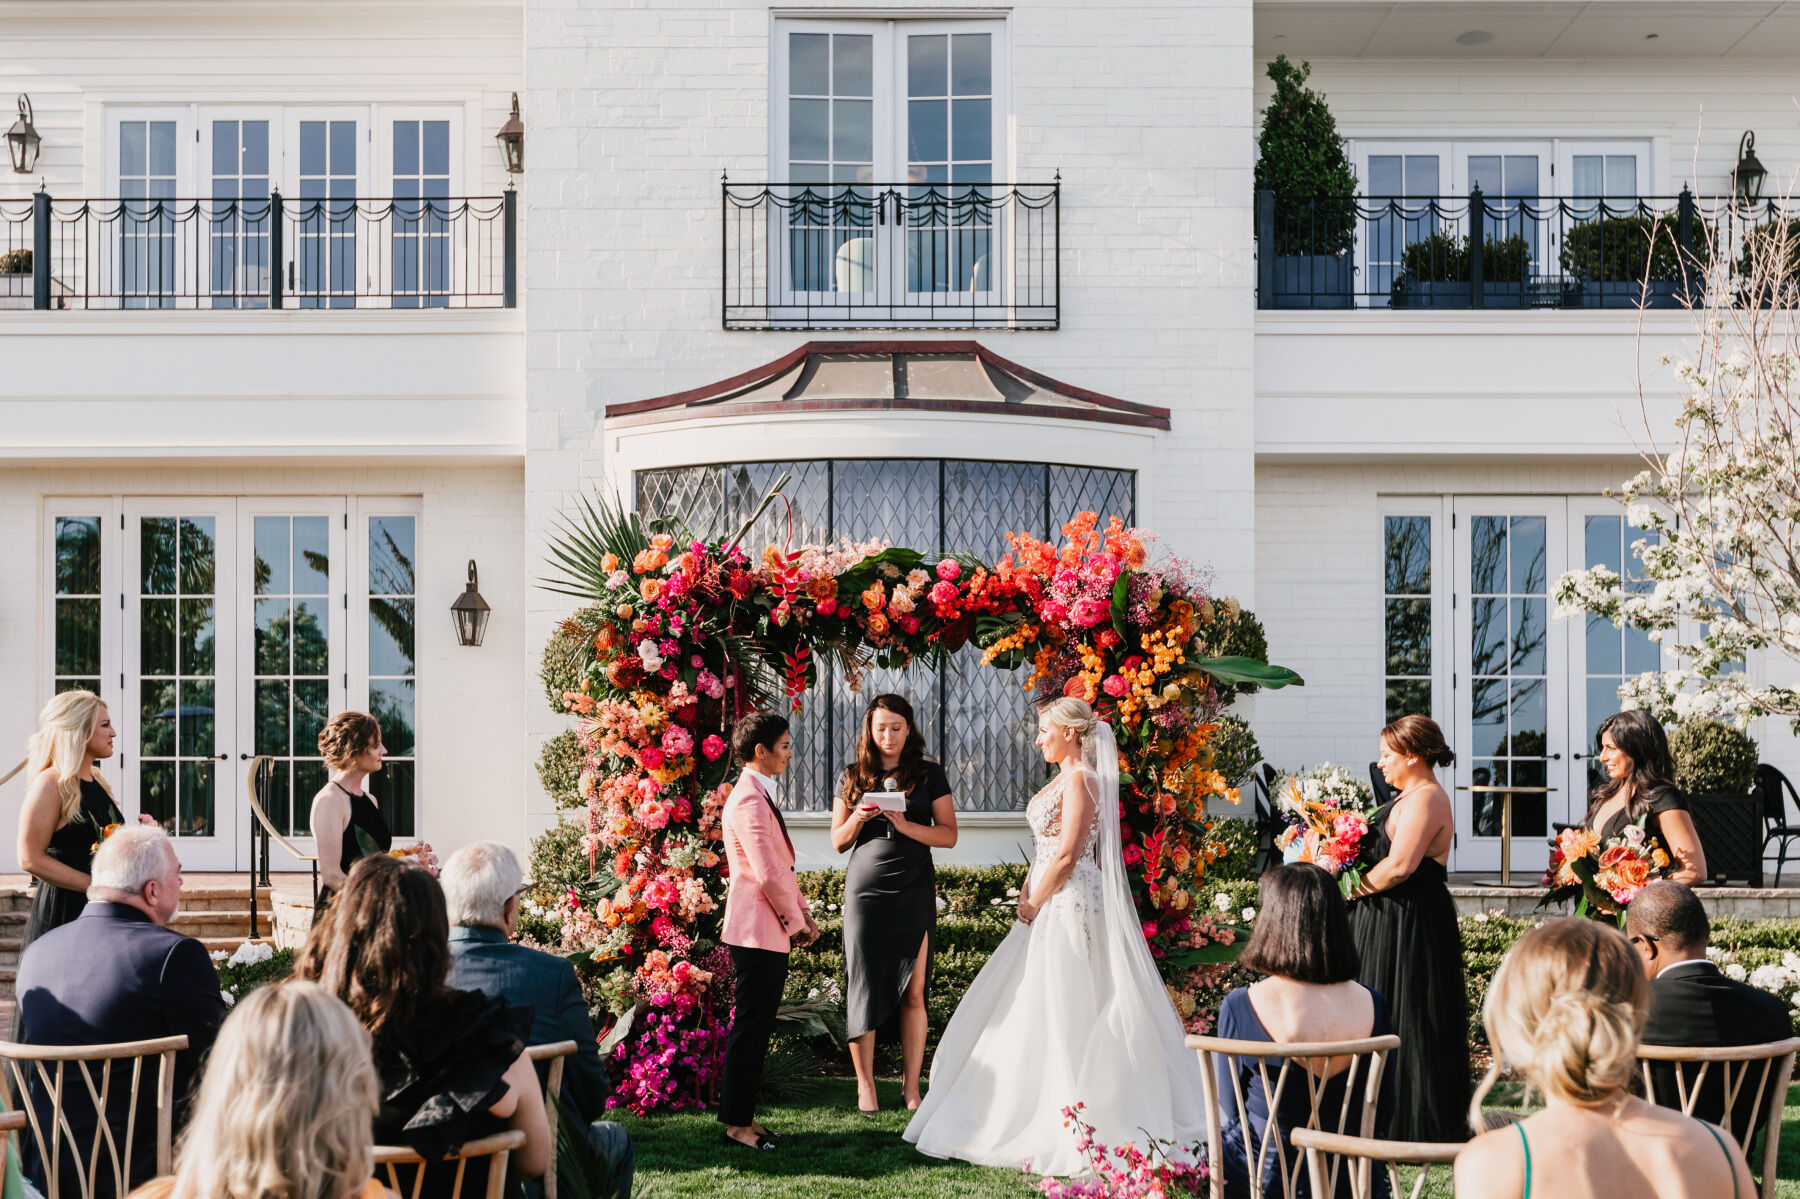 Colorful Wedding: Two brides exchanging vows at Rosewood Miramar Beach, a wedding venue in Montecito, California.